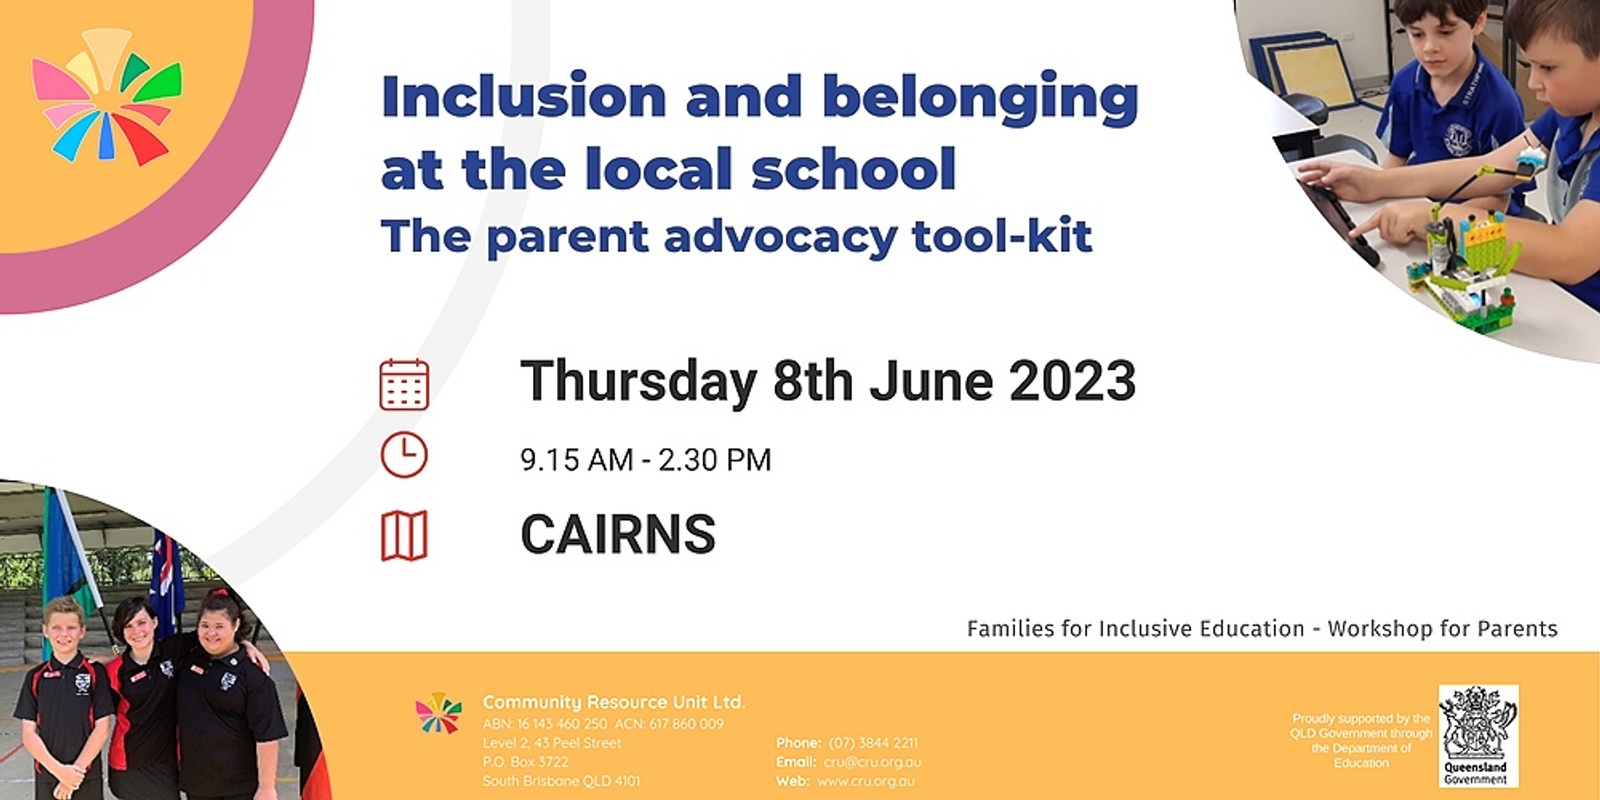 CAIRNS: "Inclusion and belonging at the local school:  The parent advocacy tool-kit" - 8 June 